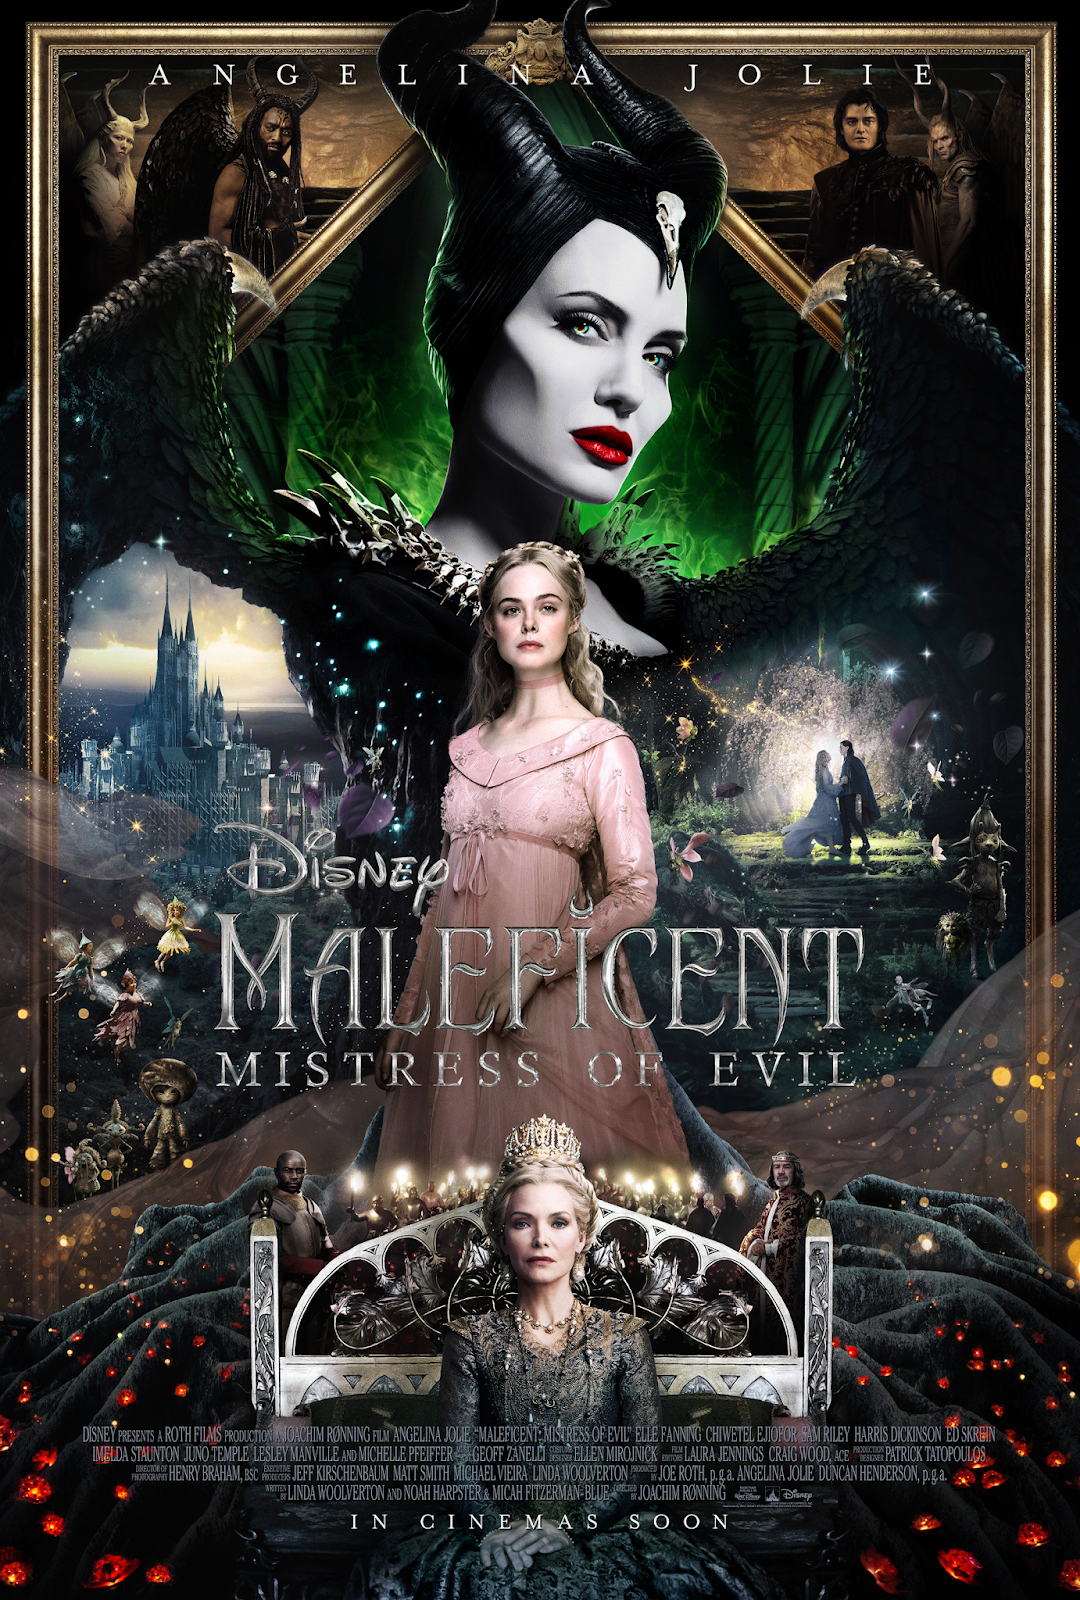 maleficent 2 movie review essay